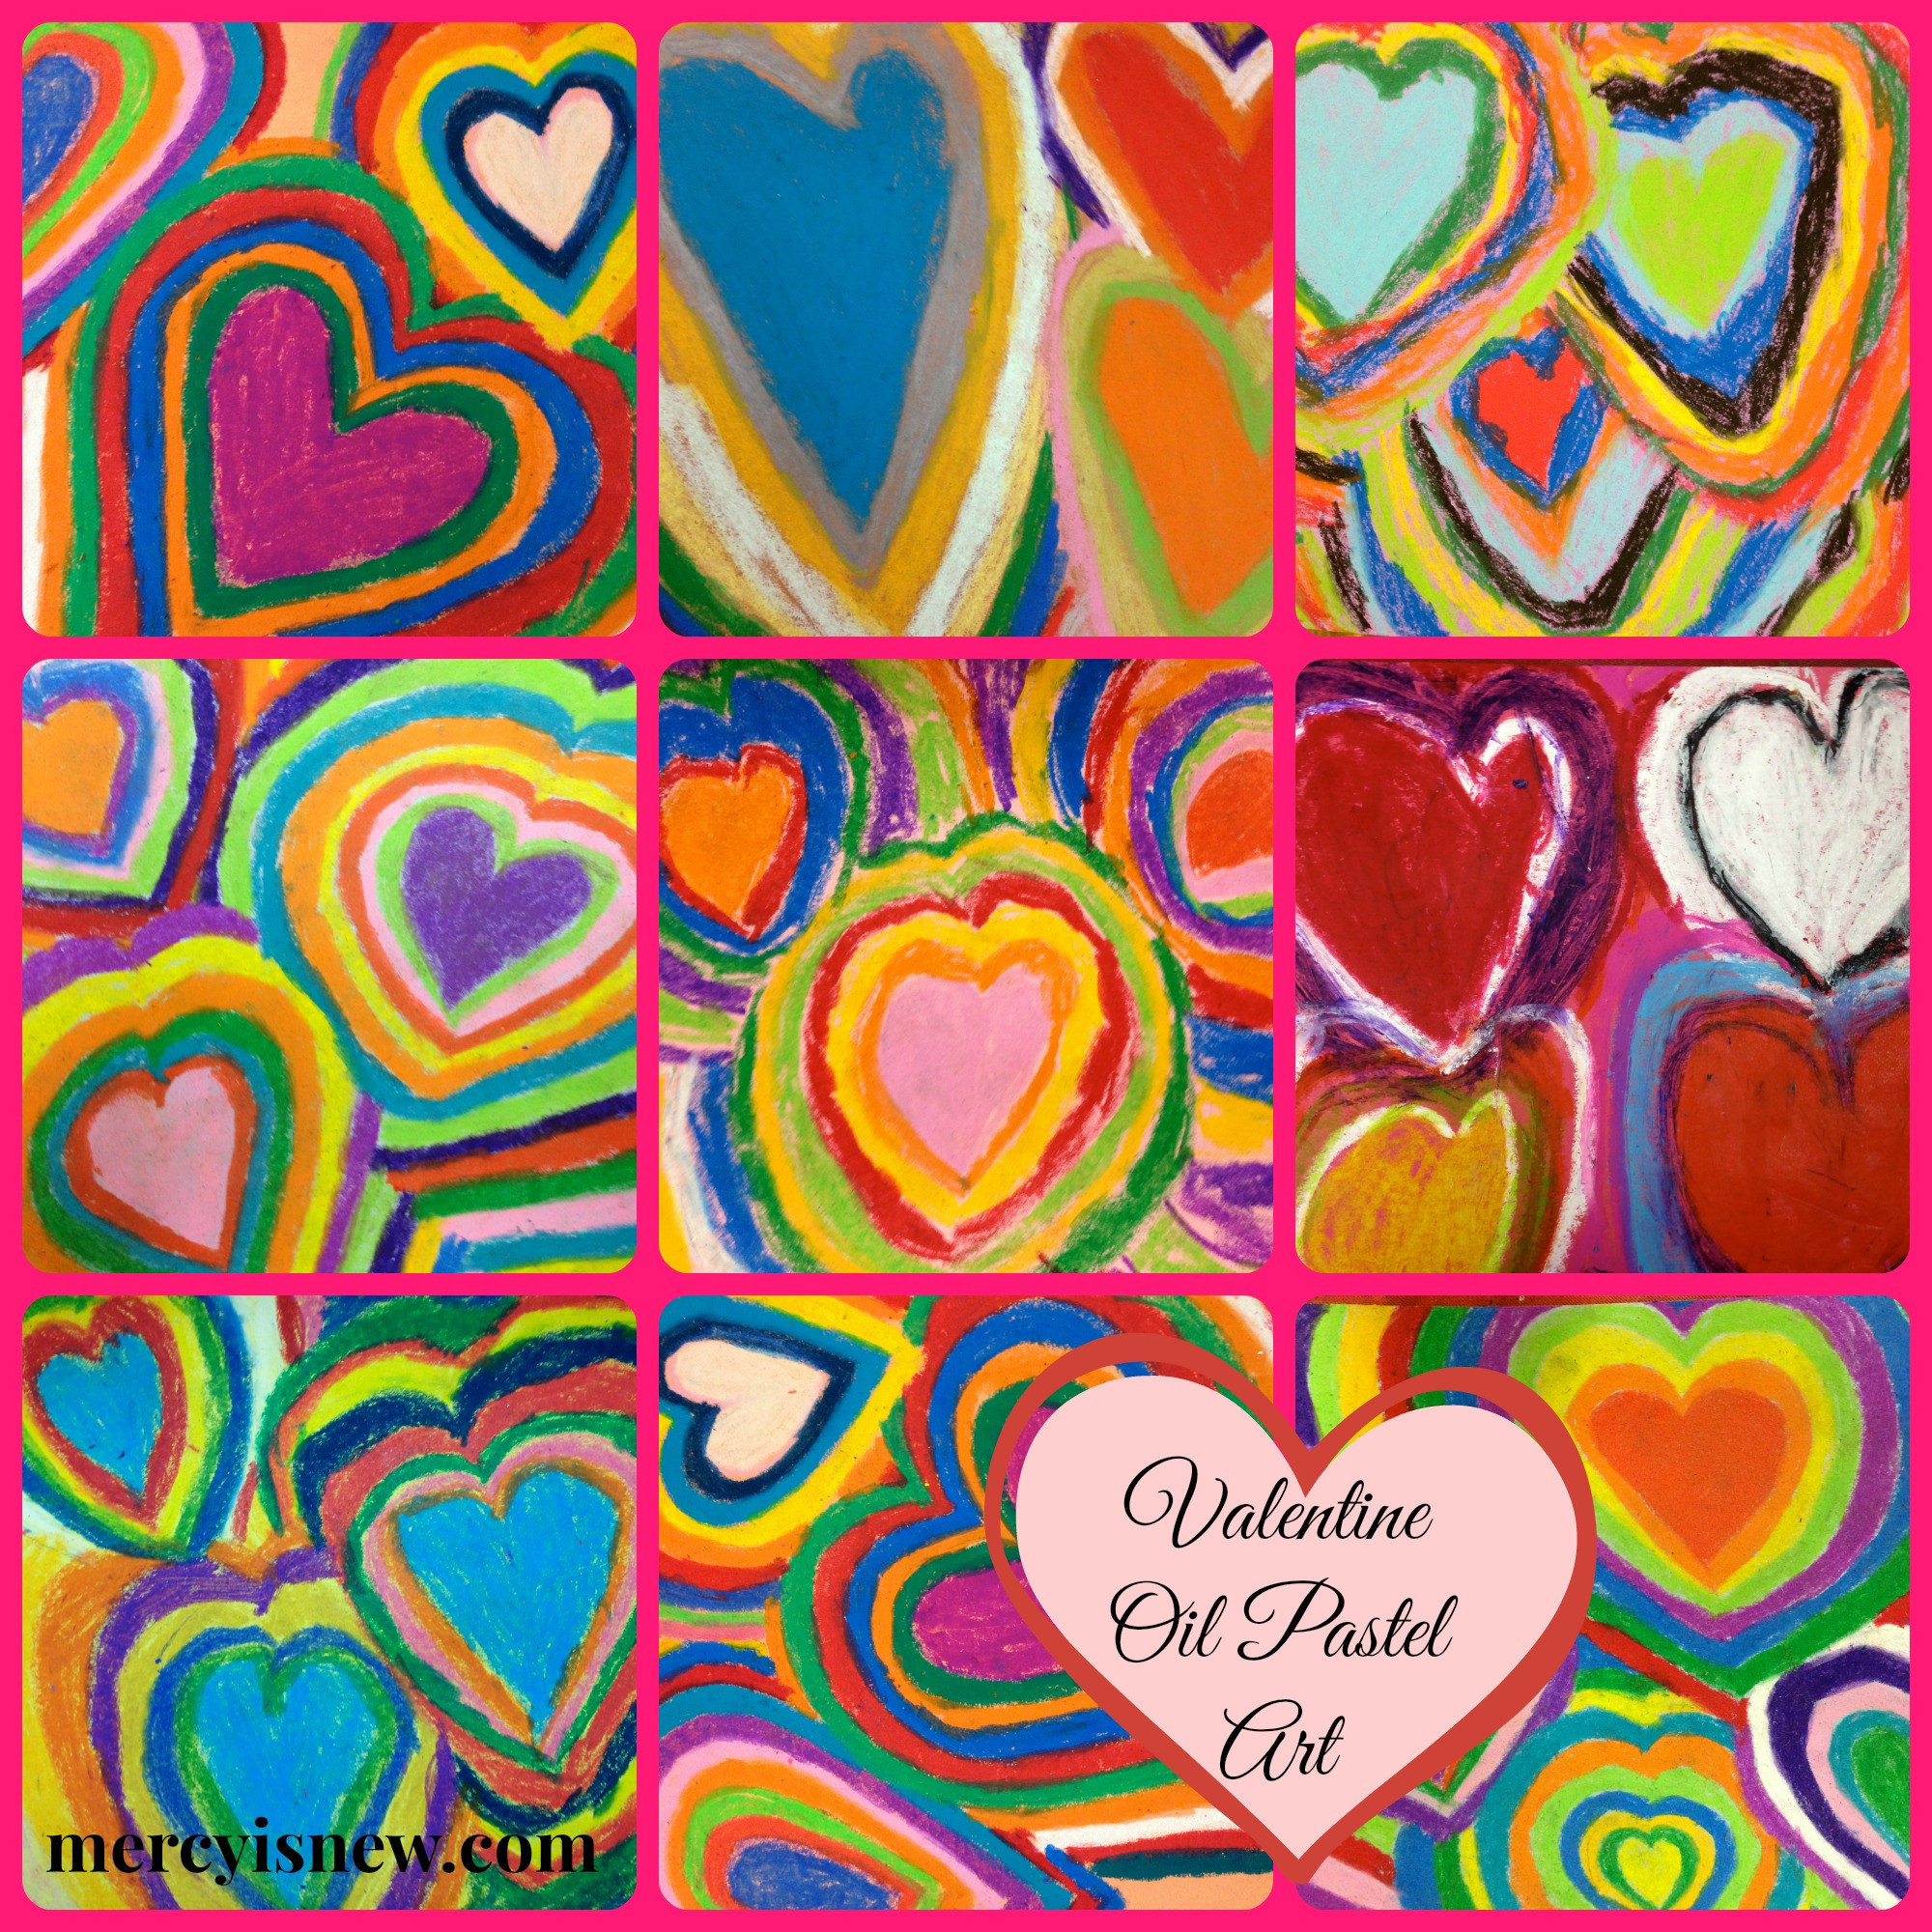 Valentines Day Art Ideas
 Simple and Frugal Ways to Celebrate Valentine’s Day